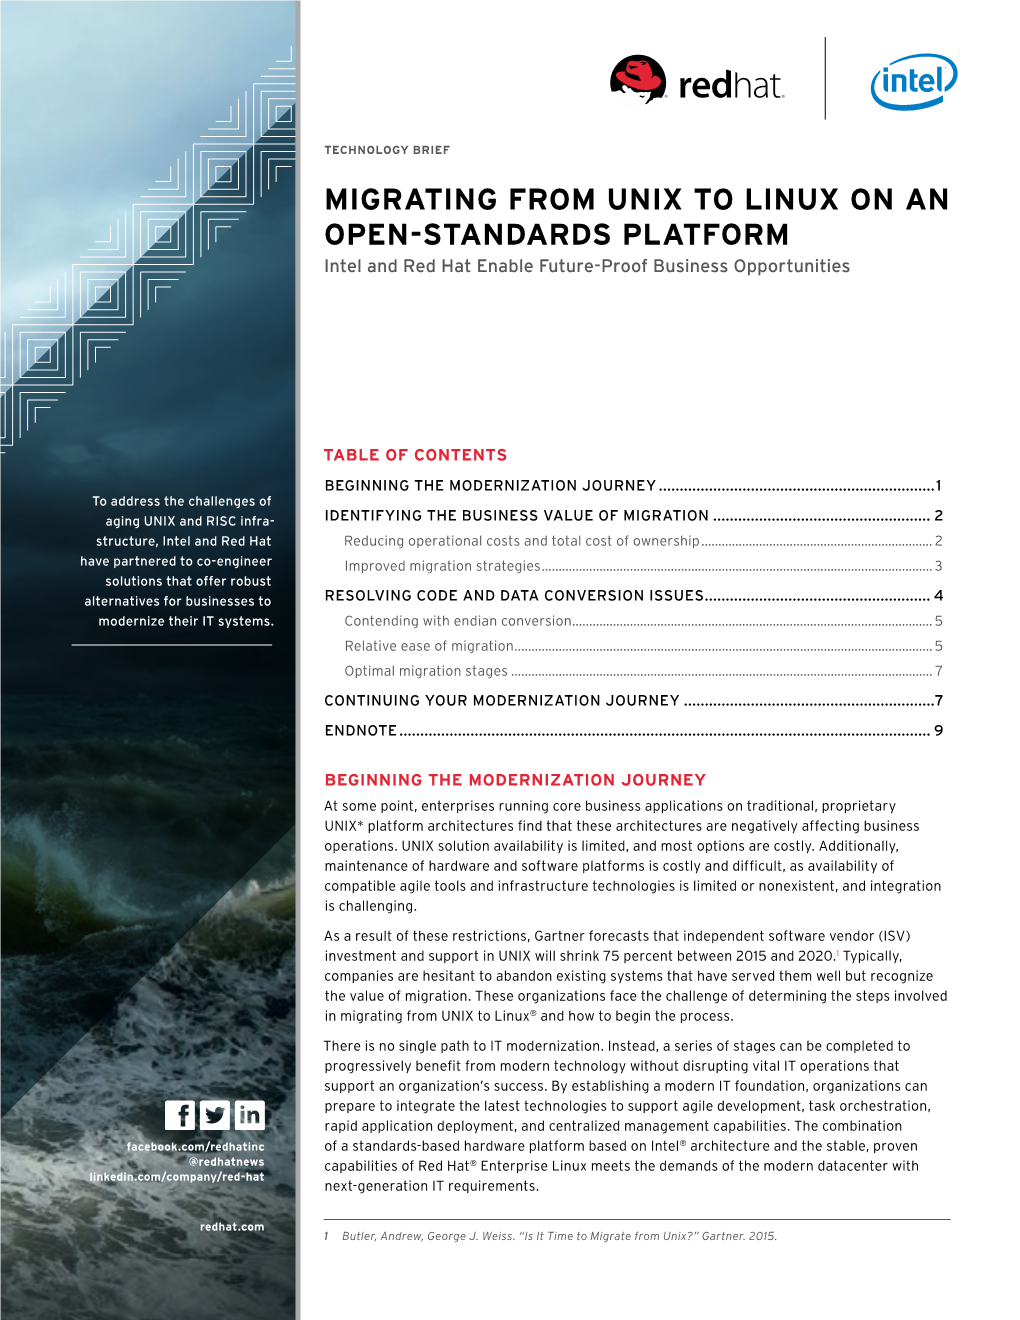 MIGRATING from UNIX to LINUX on an OPEN-STANDARDS PLATFORM Intel and Red Hat Enable Future-Proof Business Opportunities